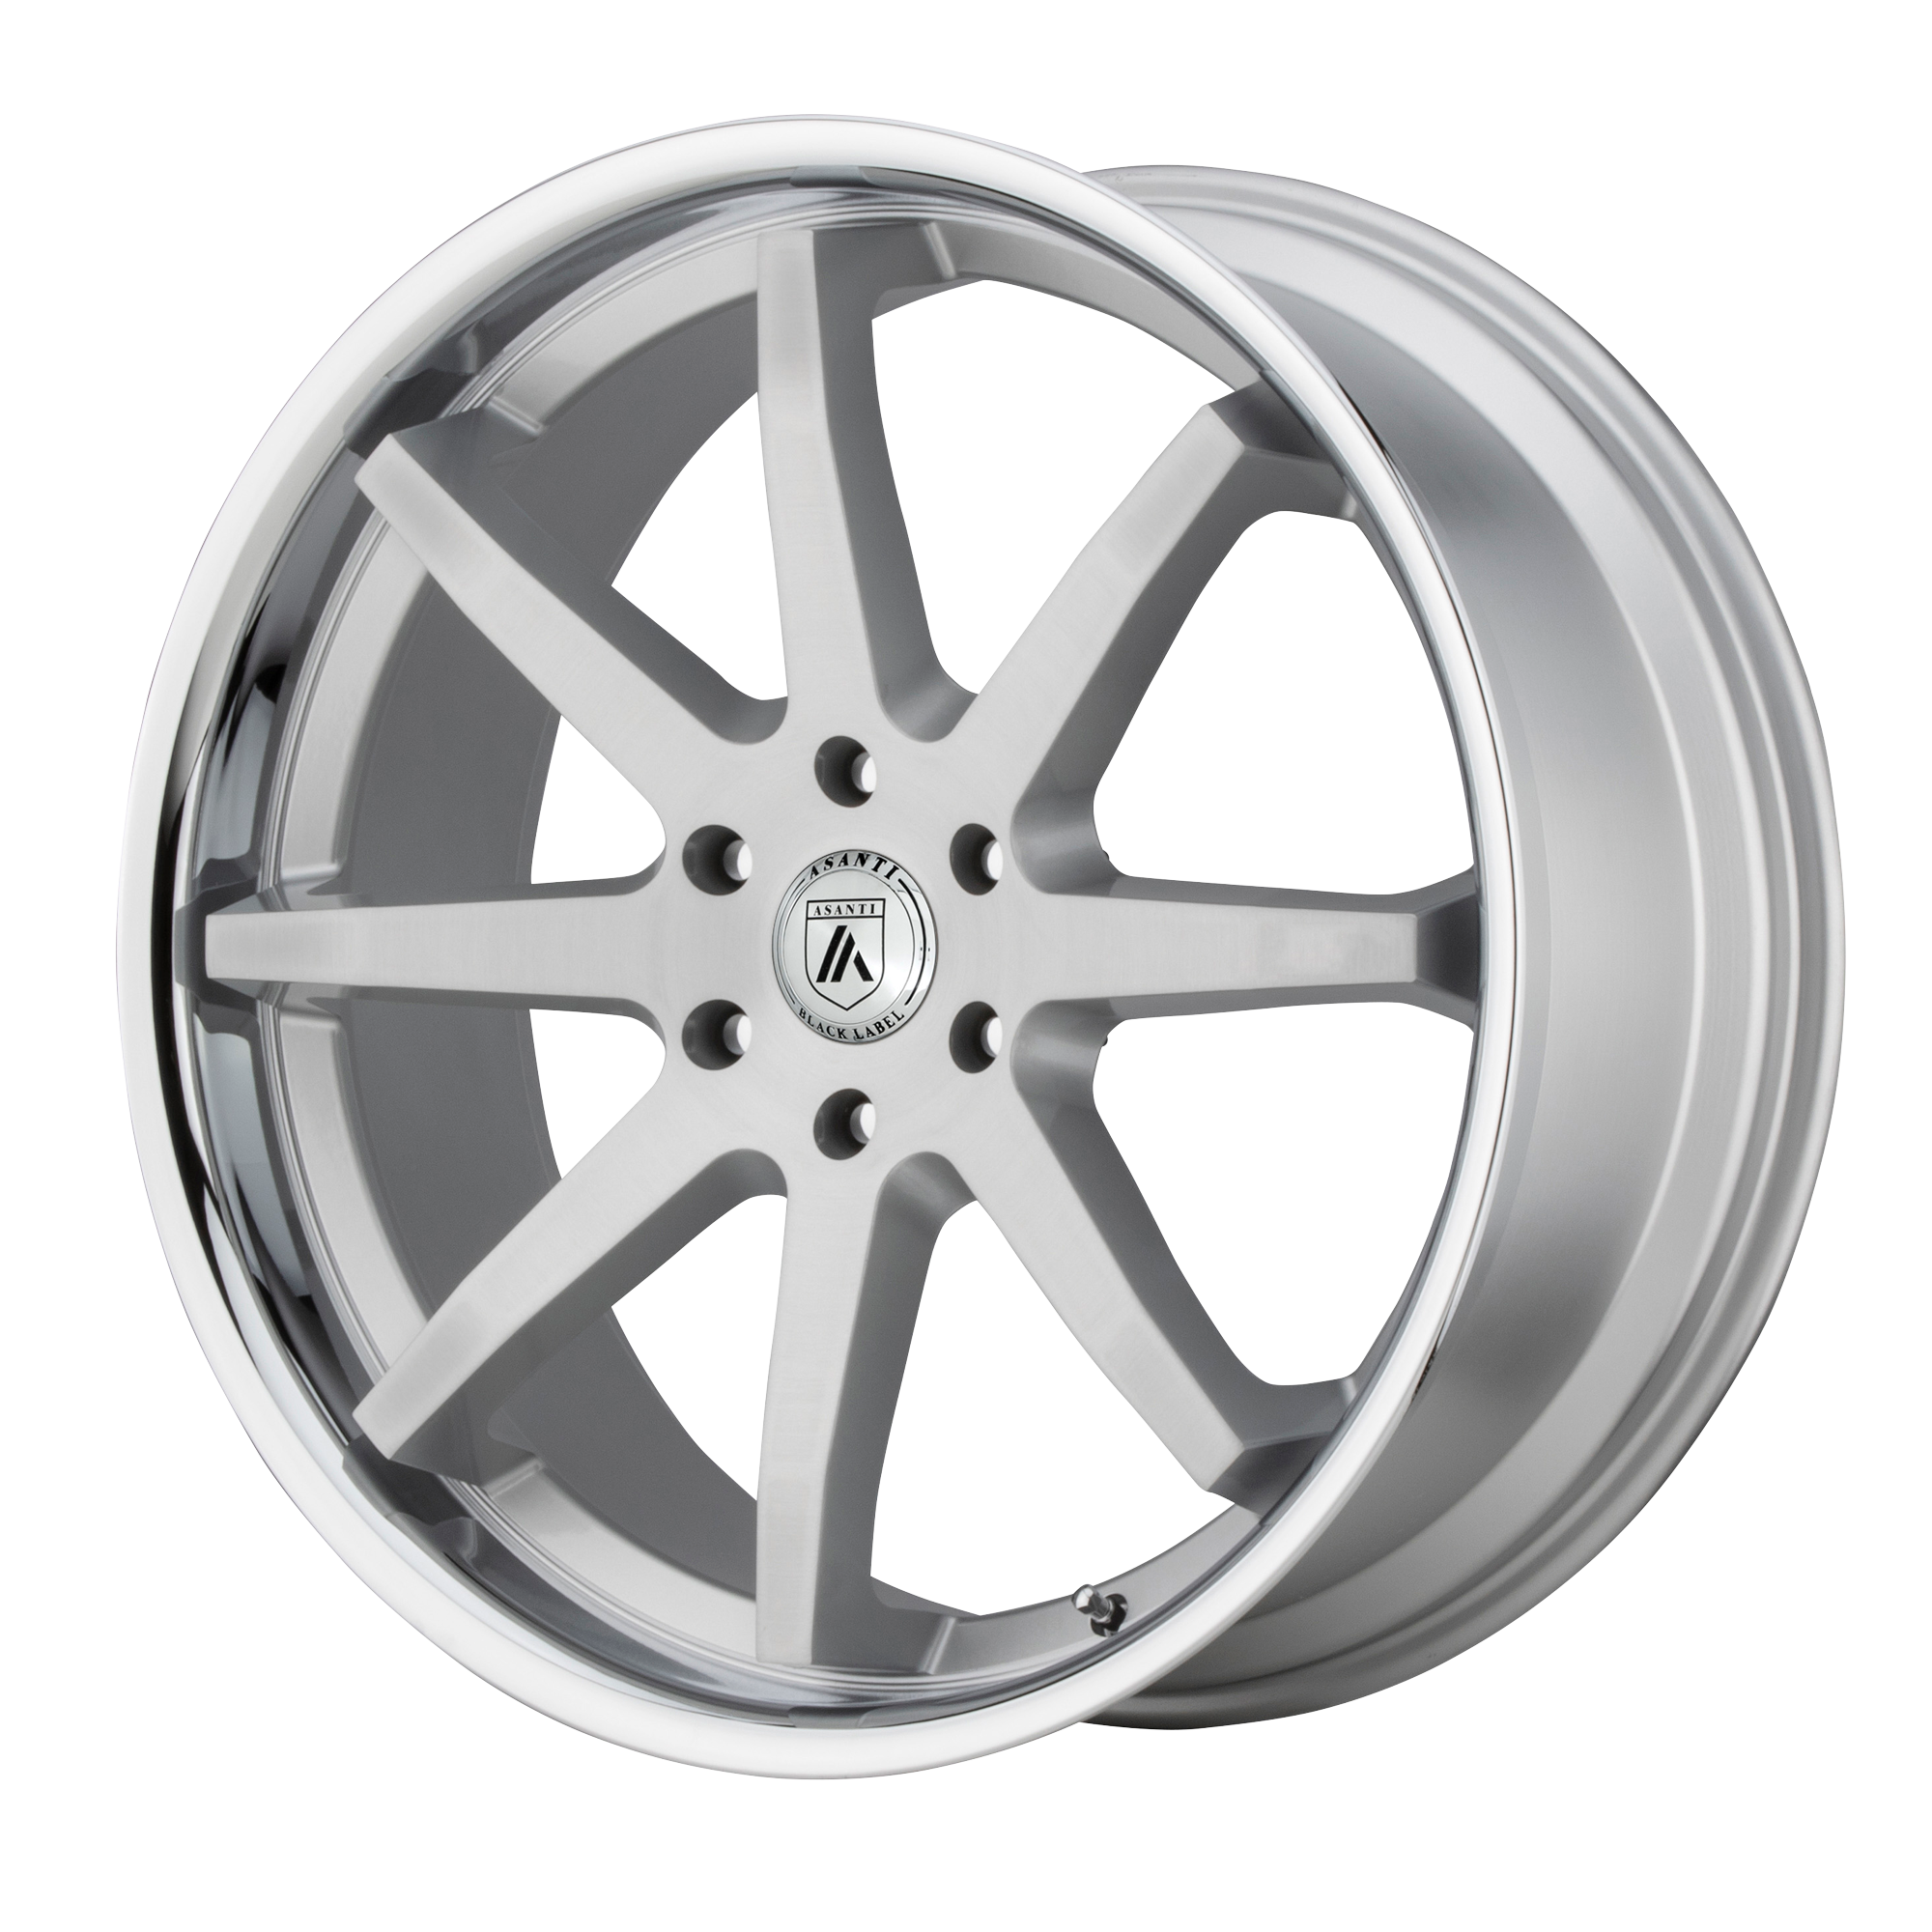 KAISER 20x9 5x120.00 BRUSHED SILVER W/ CHROME LIP (30 mm) - Tires and Engine Performance